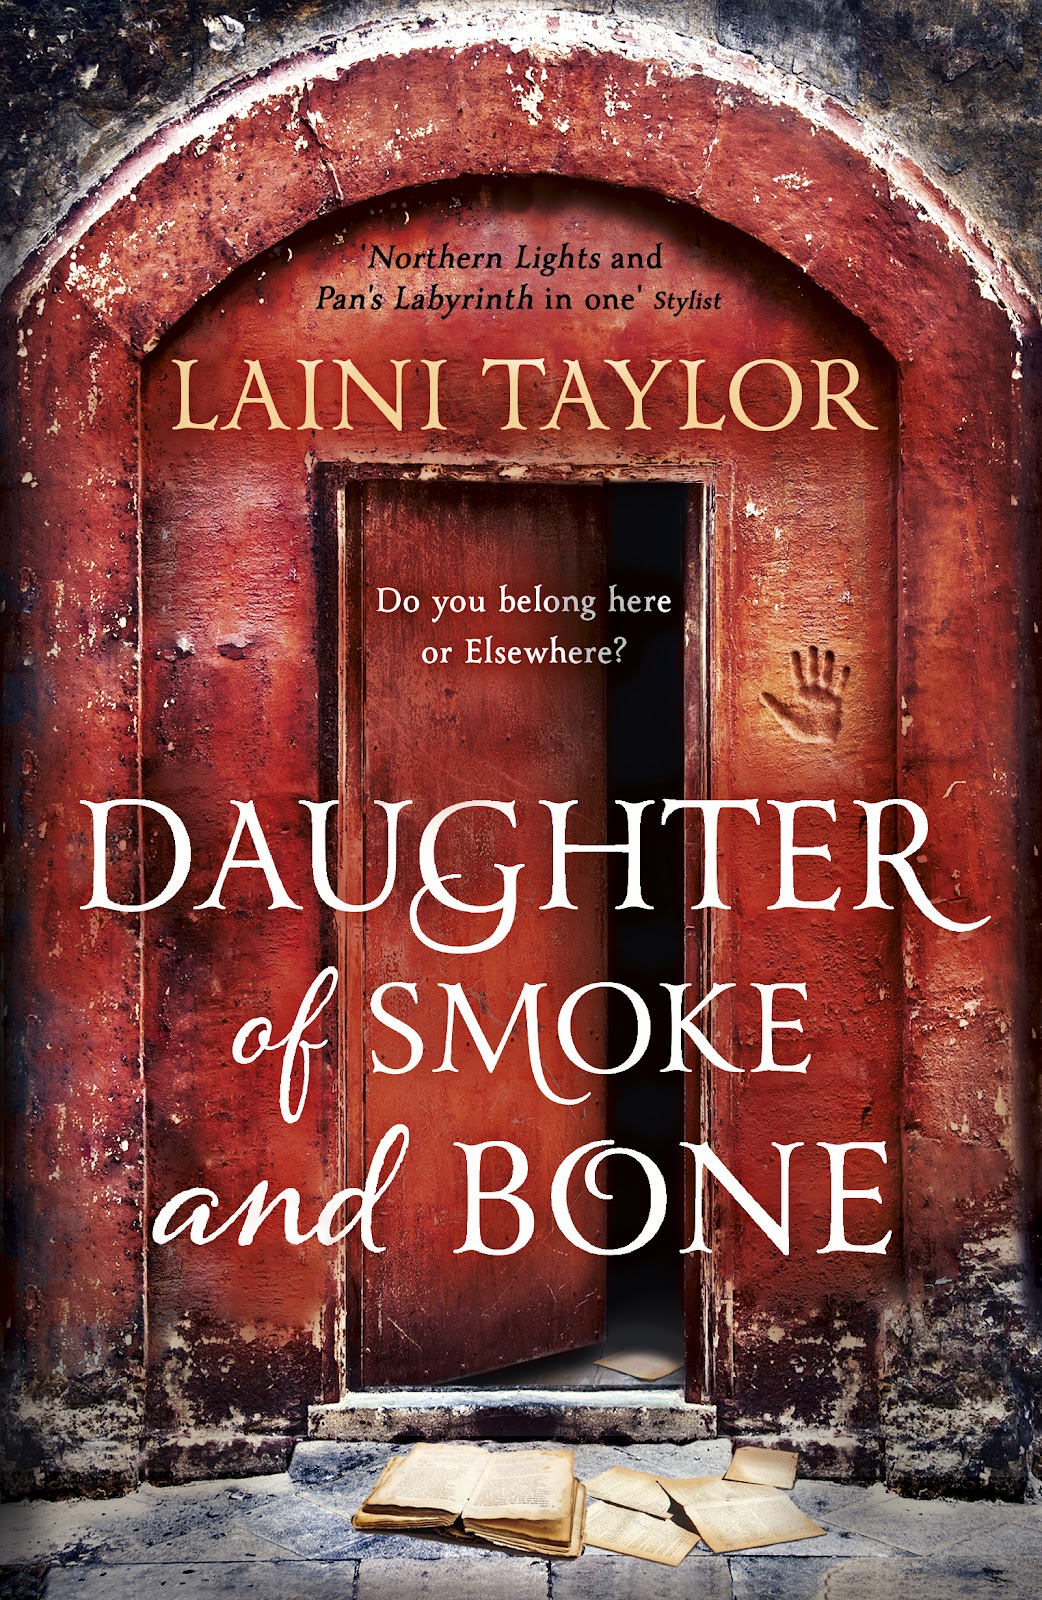 Book Review: Daughter of Smoke and Bone, by Laini Taylor